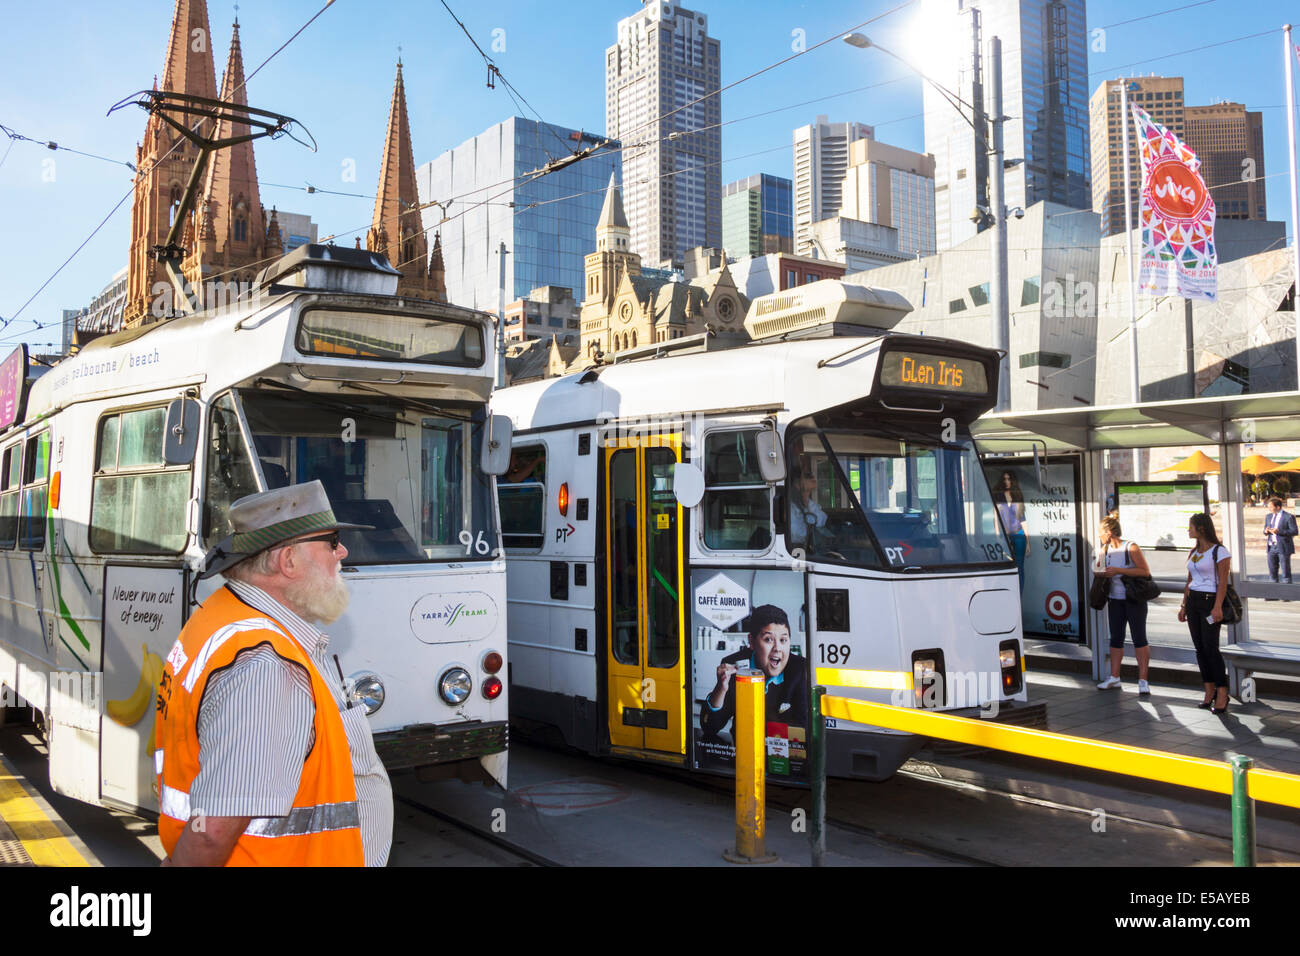 Melbourne Australia,Federation Square,St. Kilda Road,tram,trolley,city skyline,skyscrapers,high rise,buildings,St. Paul's Cathedral,man men male,safet Stock Photo